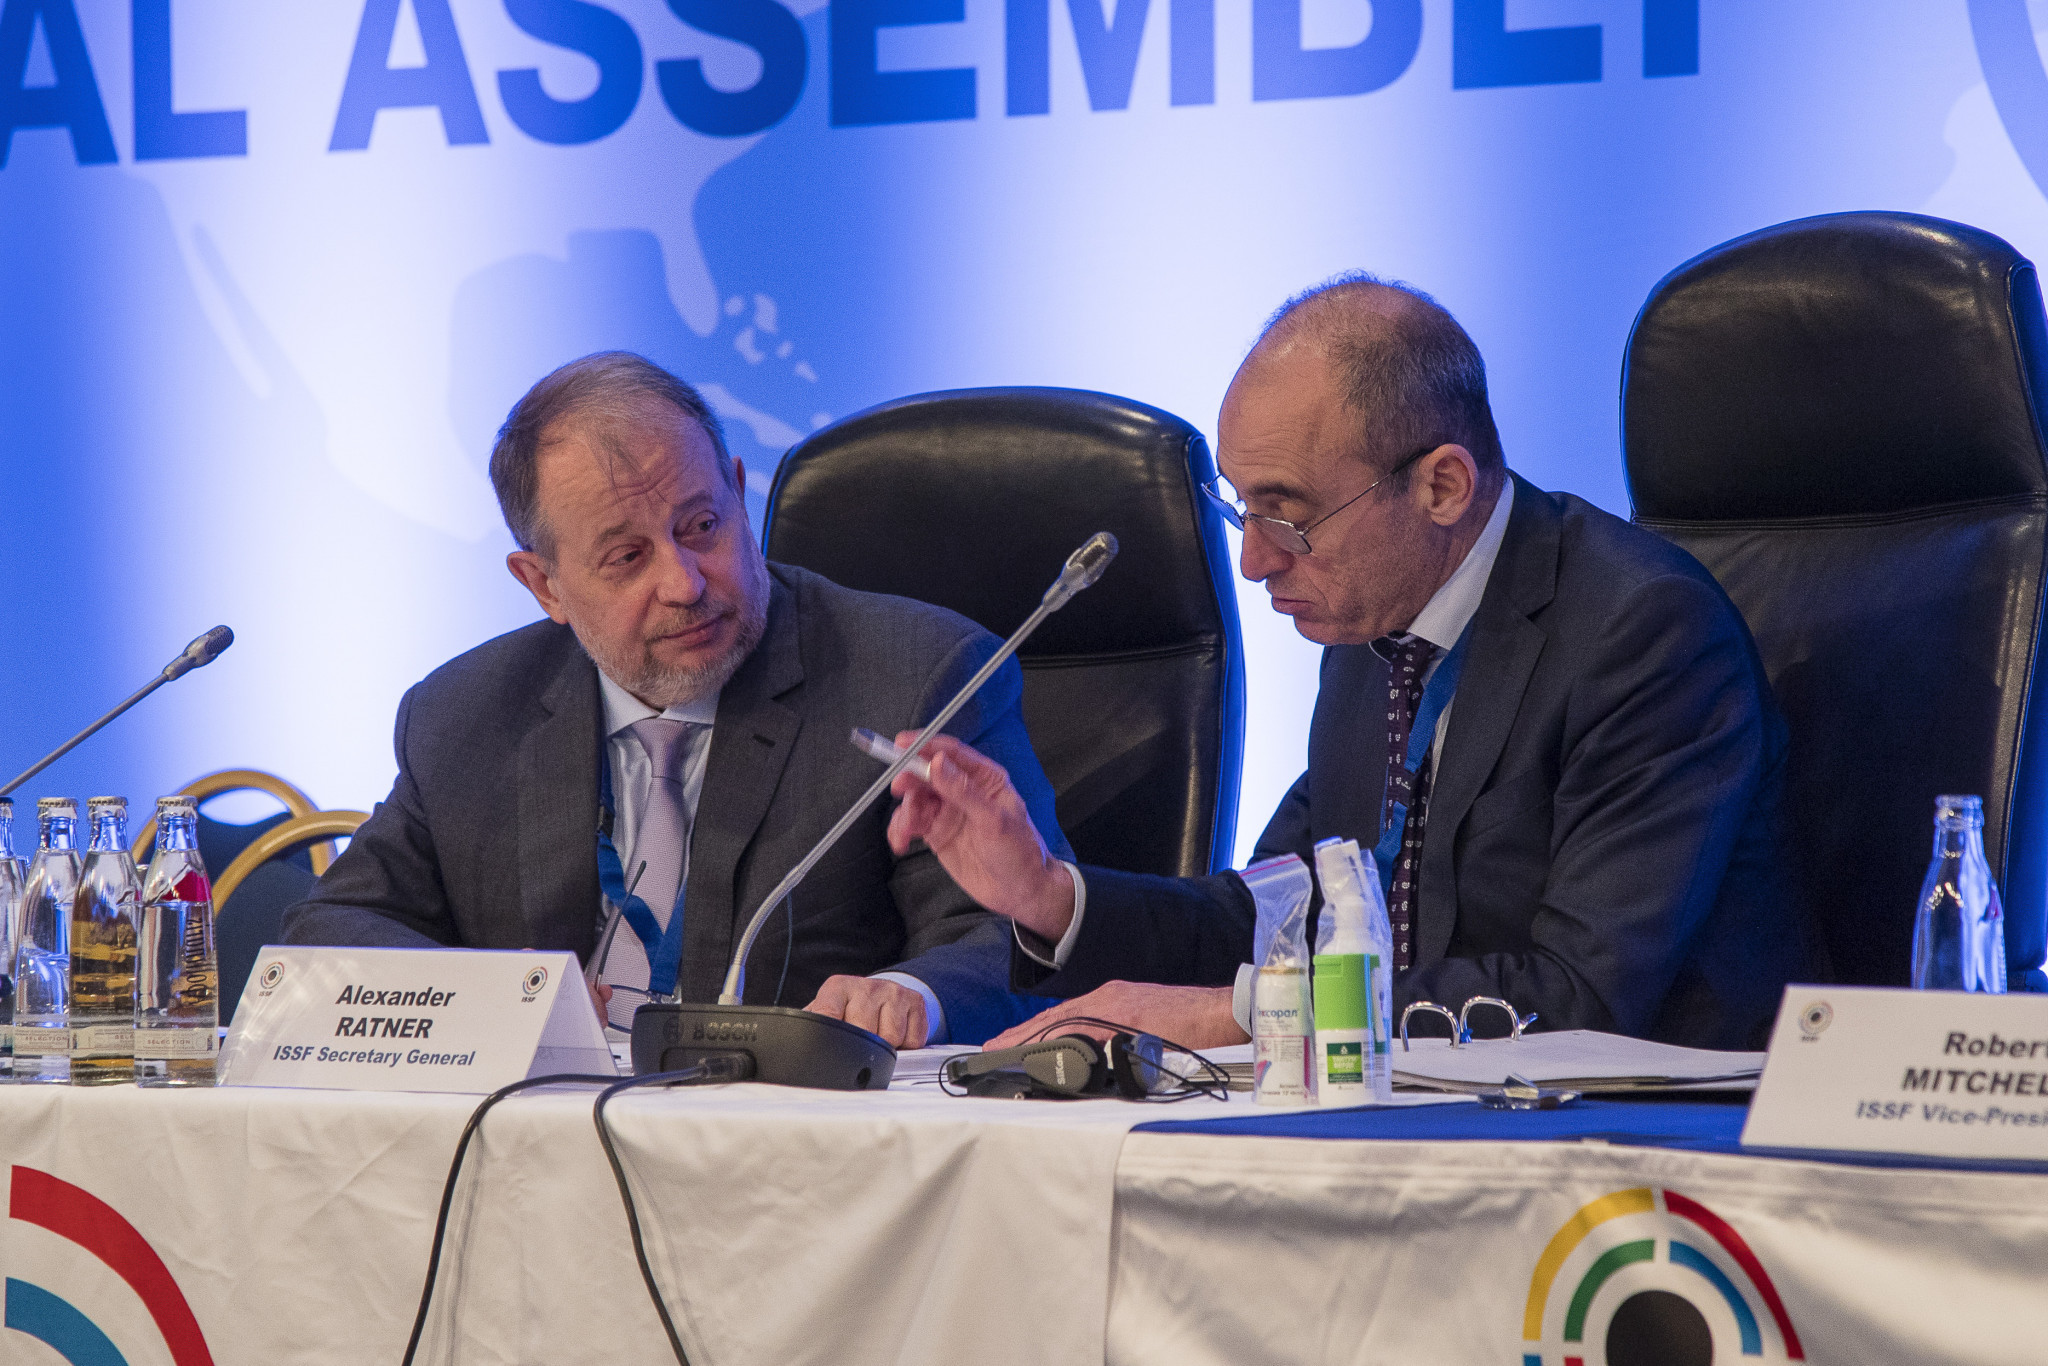 New ISSF President Vladimir Lisin and secretary general Alexander Ratner are set to visit Birmingham to press shooting's case for inclusion in the 2022 Commonwealth Games ©ISSF